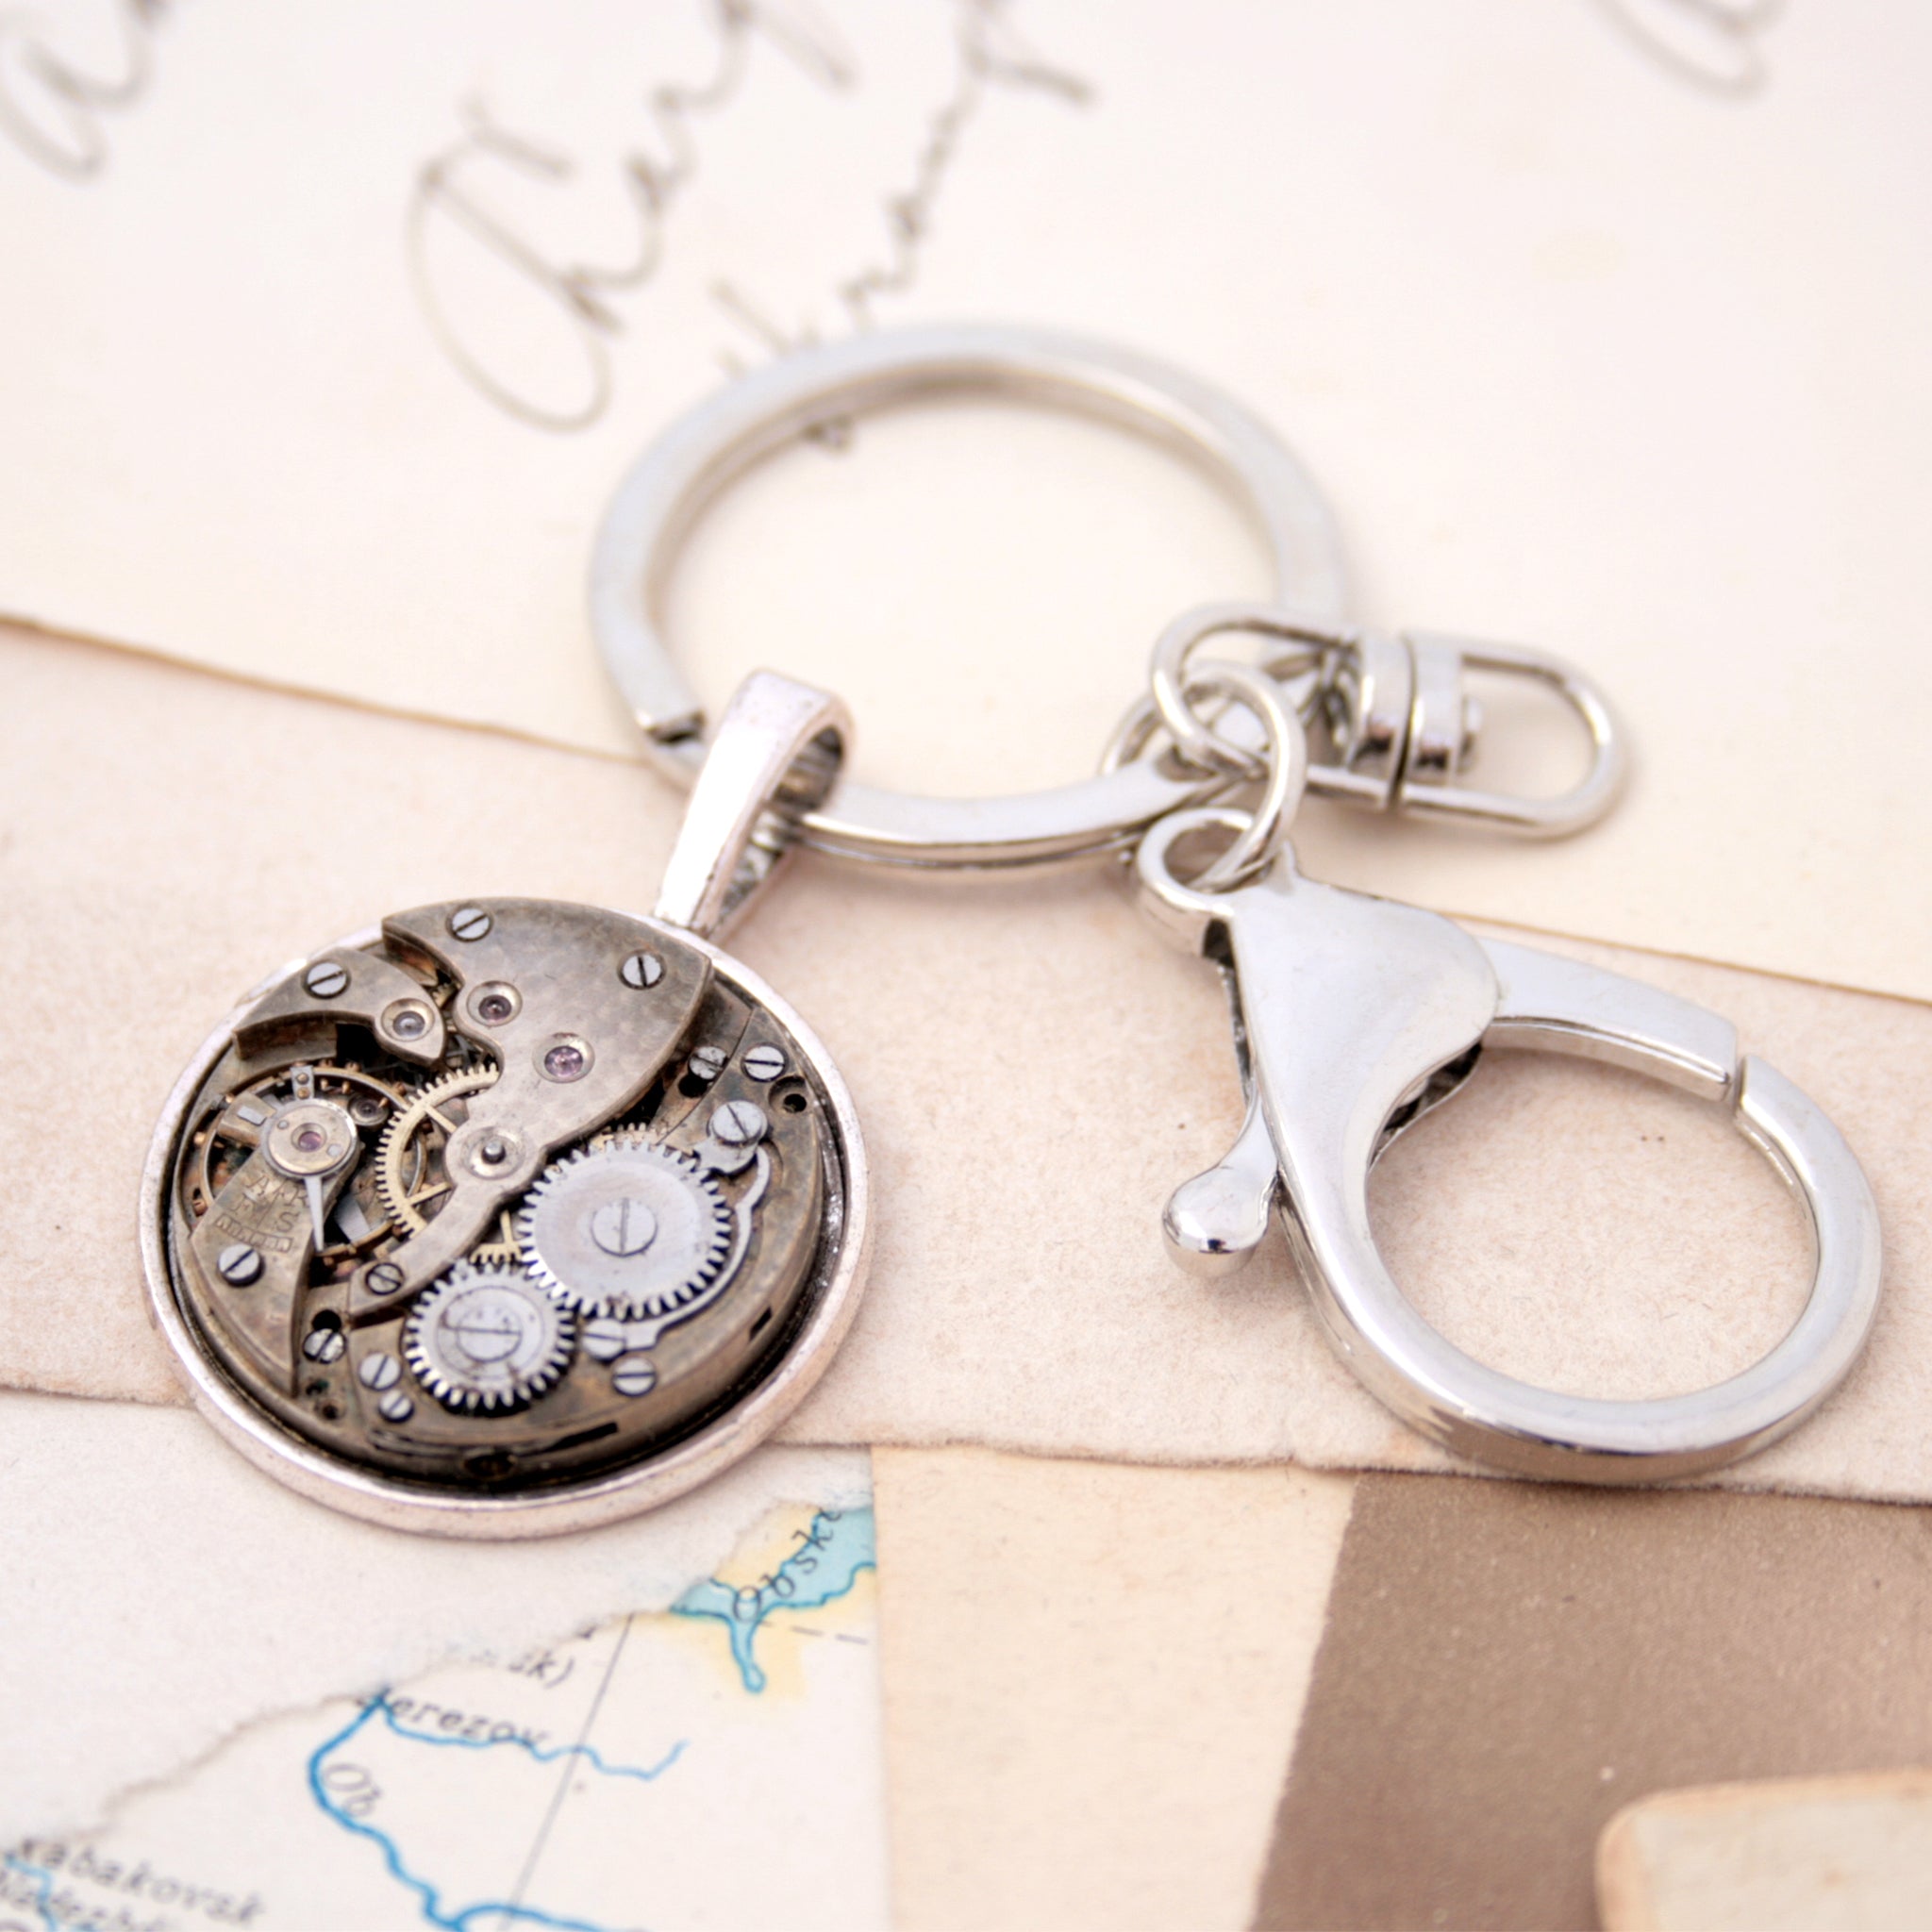 Cool keychain for him in steampunk style with watch movement